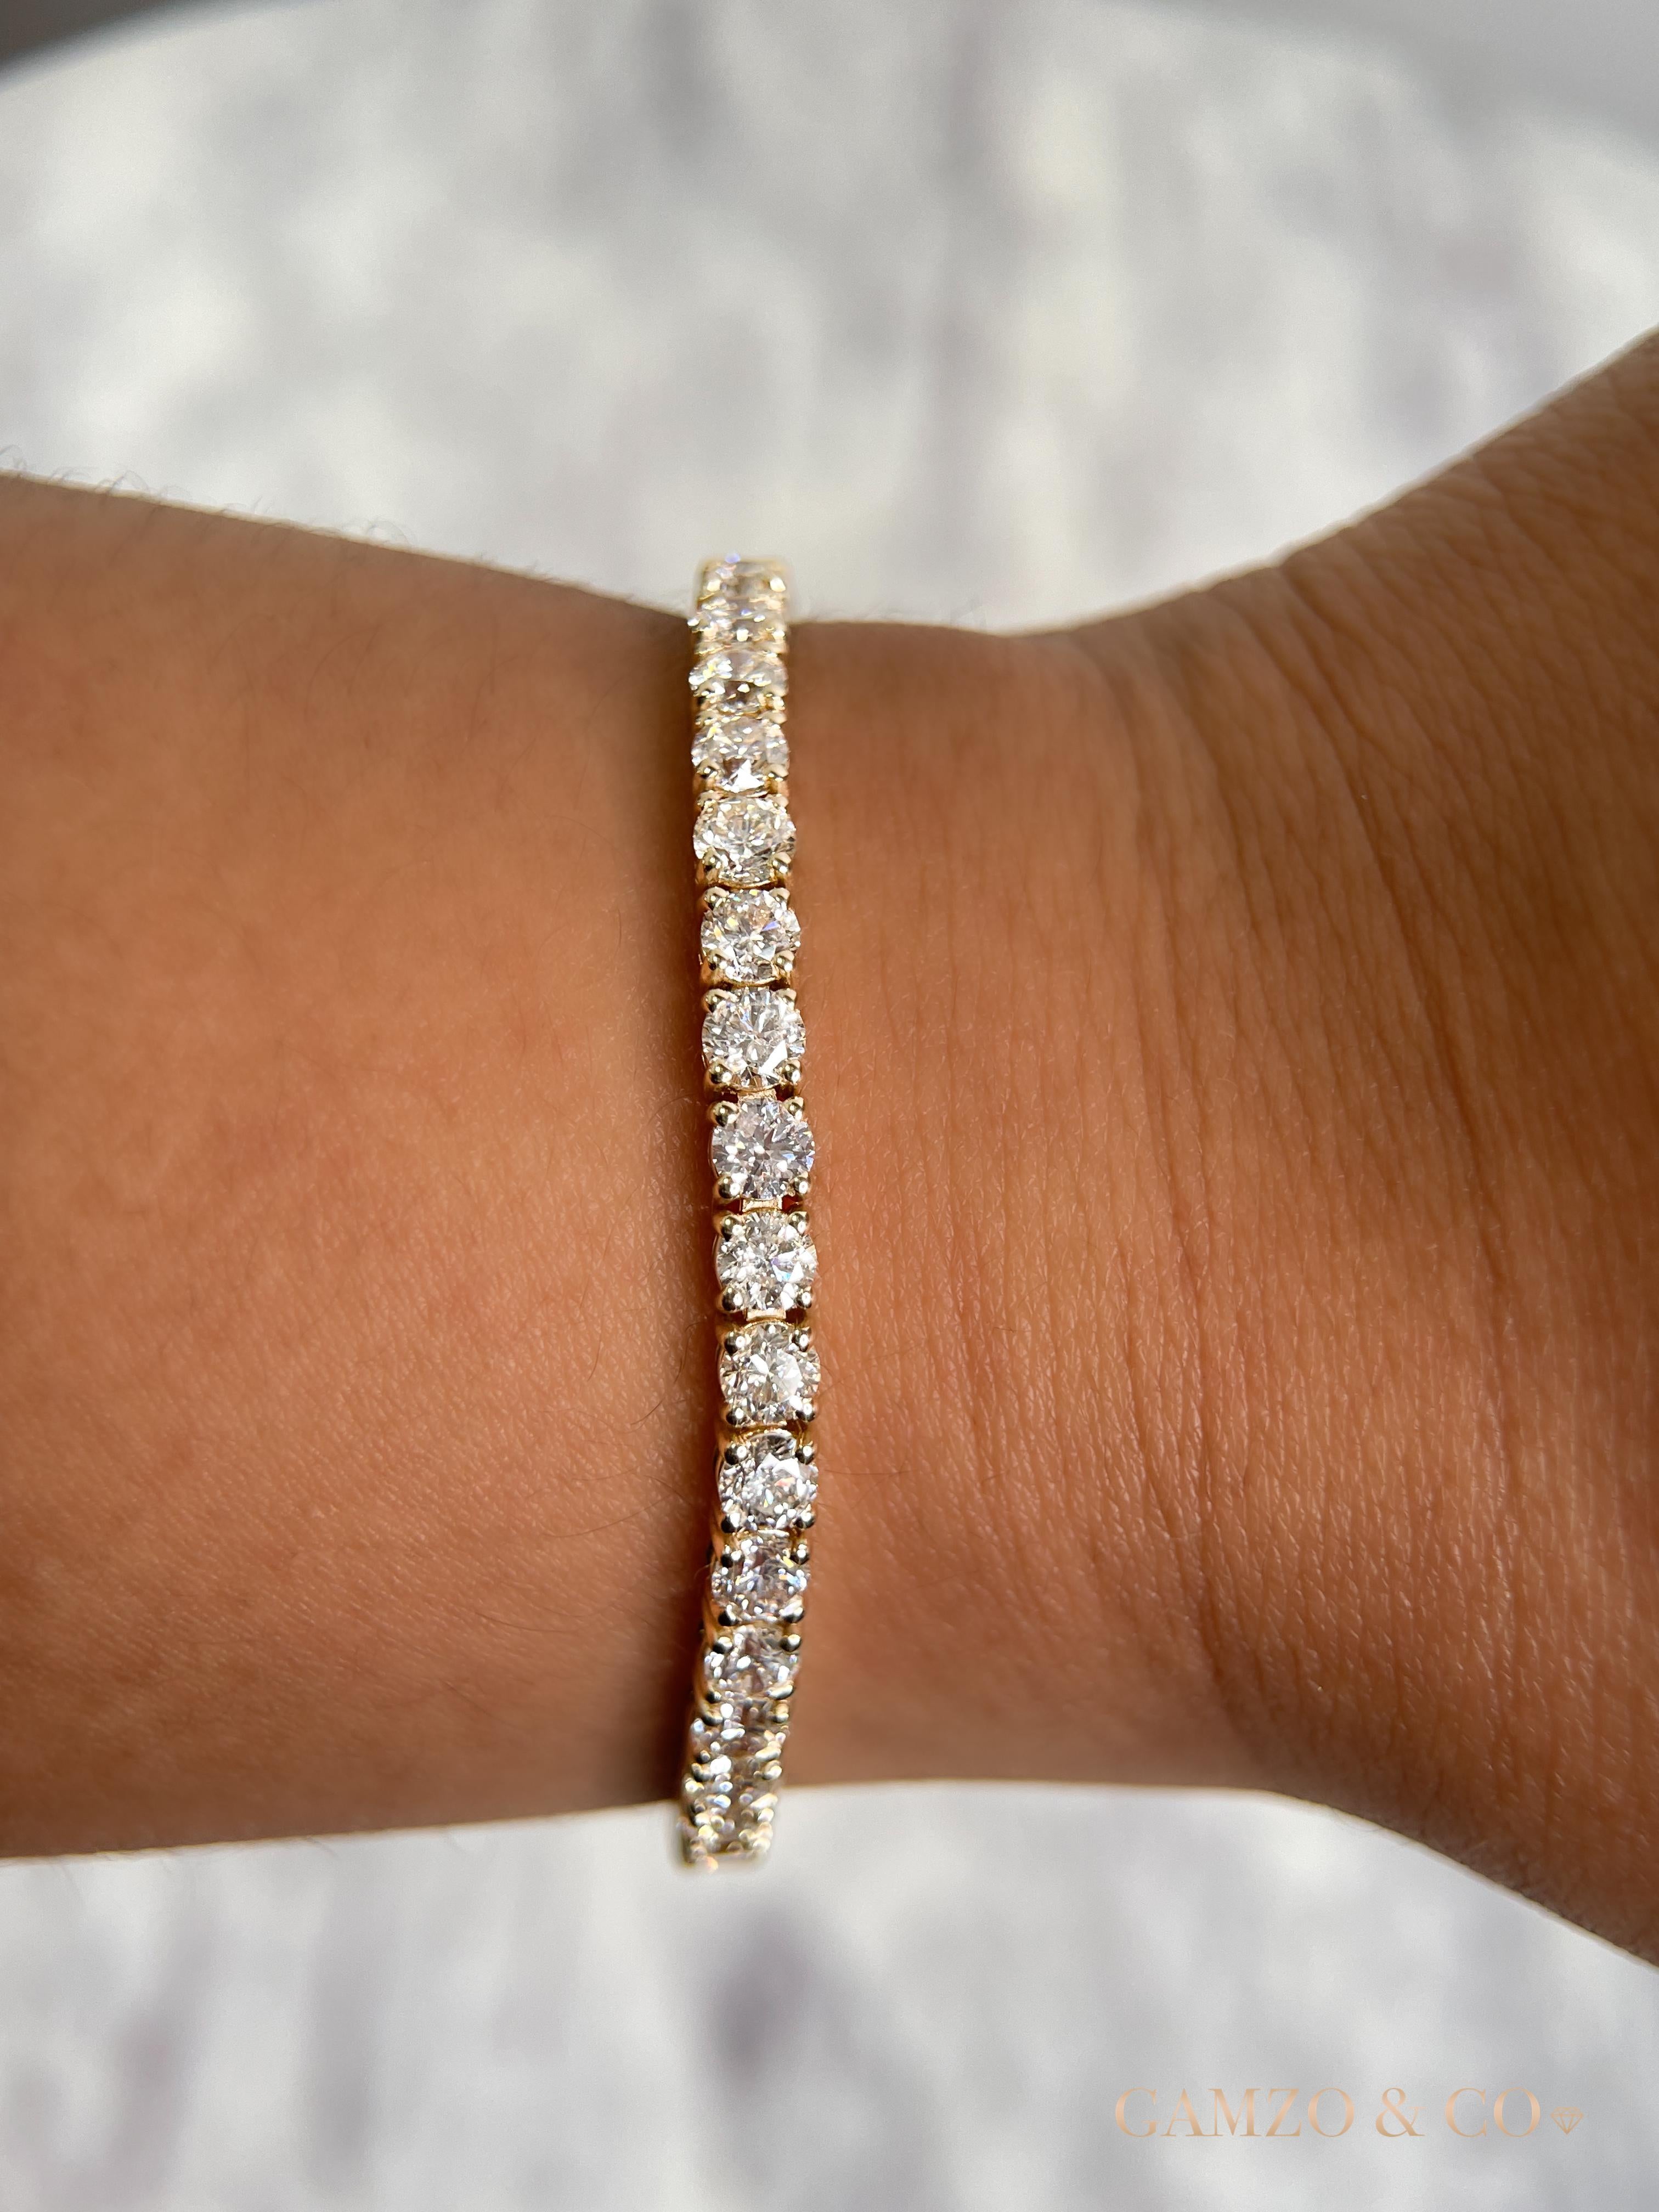 This diamond tennis bracelet features beautifully cut round diamonds set gorgeously in 14k gold.

Metal: 14k Gold
Diamond Cut: Round Natural Diamond 
Total Diamond Carats: 5ct
Diamond Clarity: VS-SI
Diamond Color: F-G
Color: Yellow Gold
Bracelet